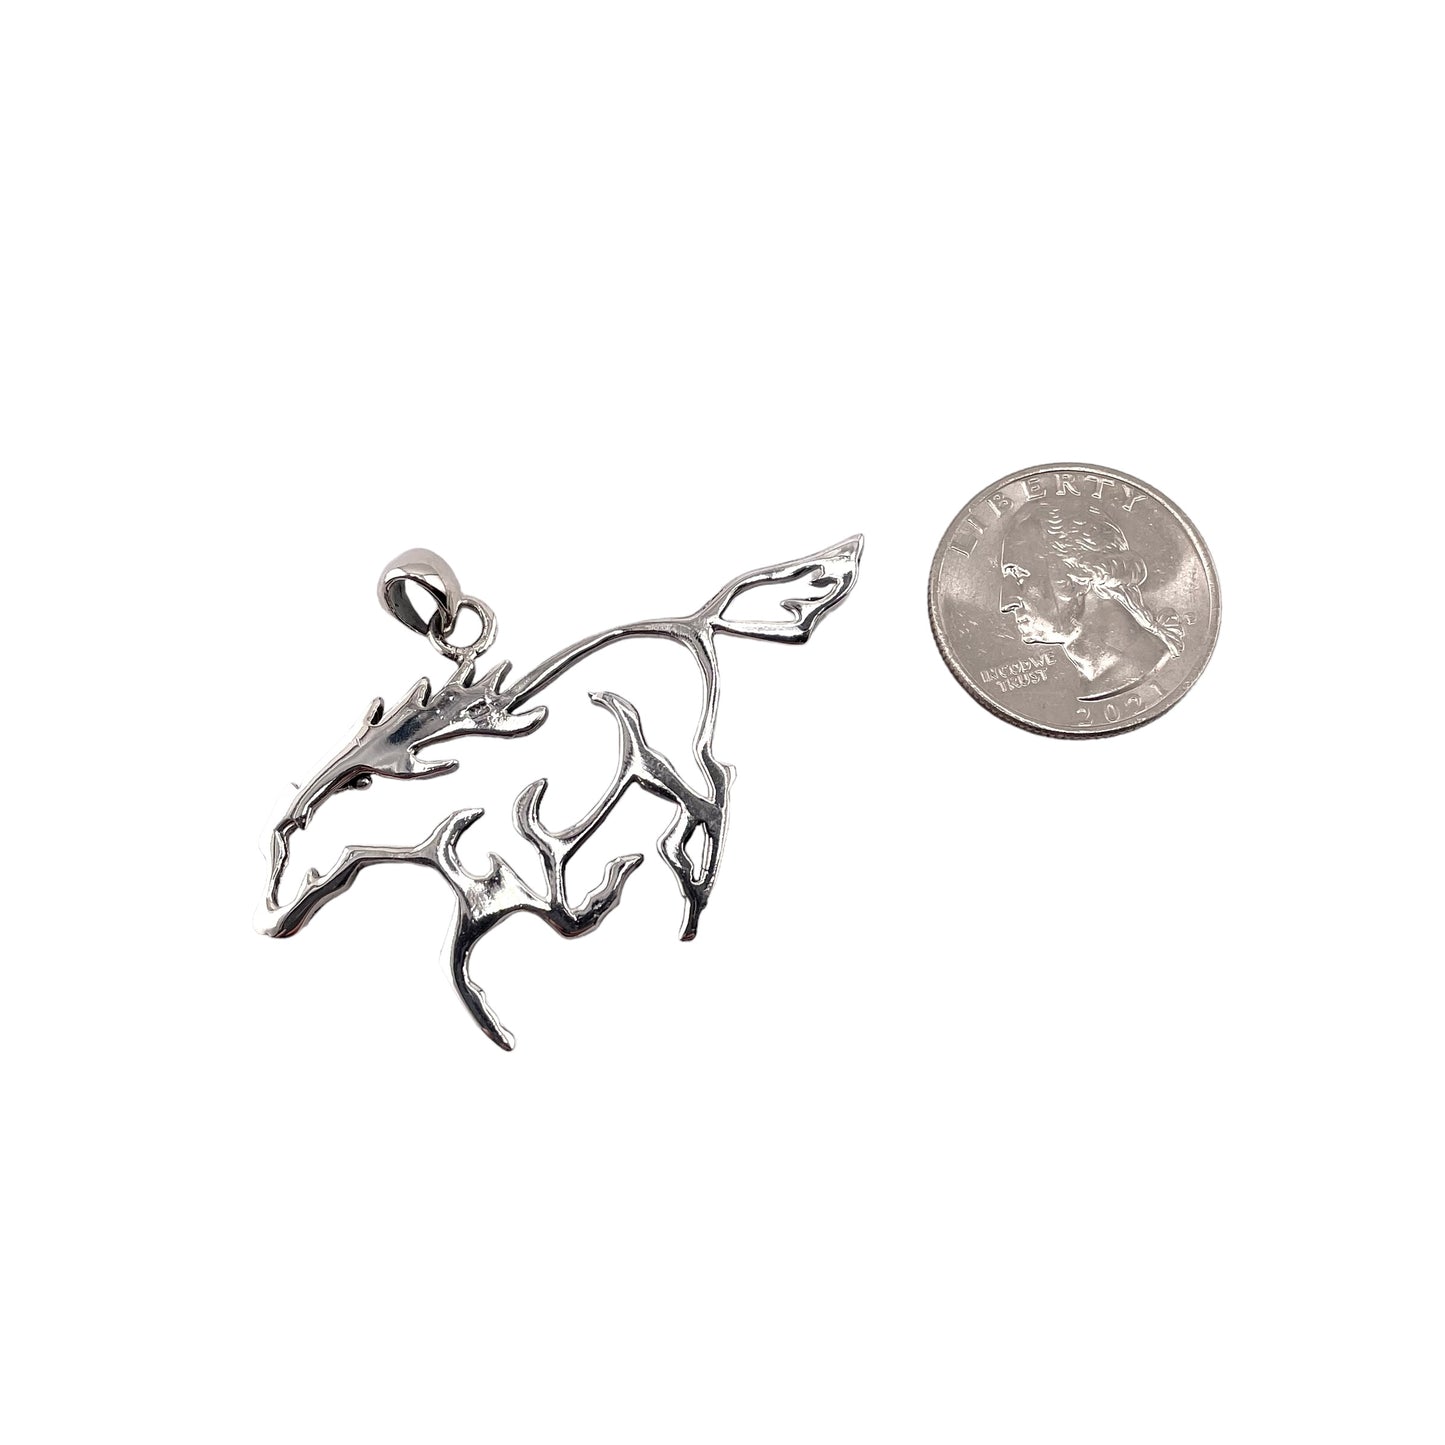 Horse Bronco Cut Out Pendant Sterling Silver